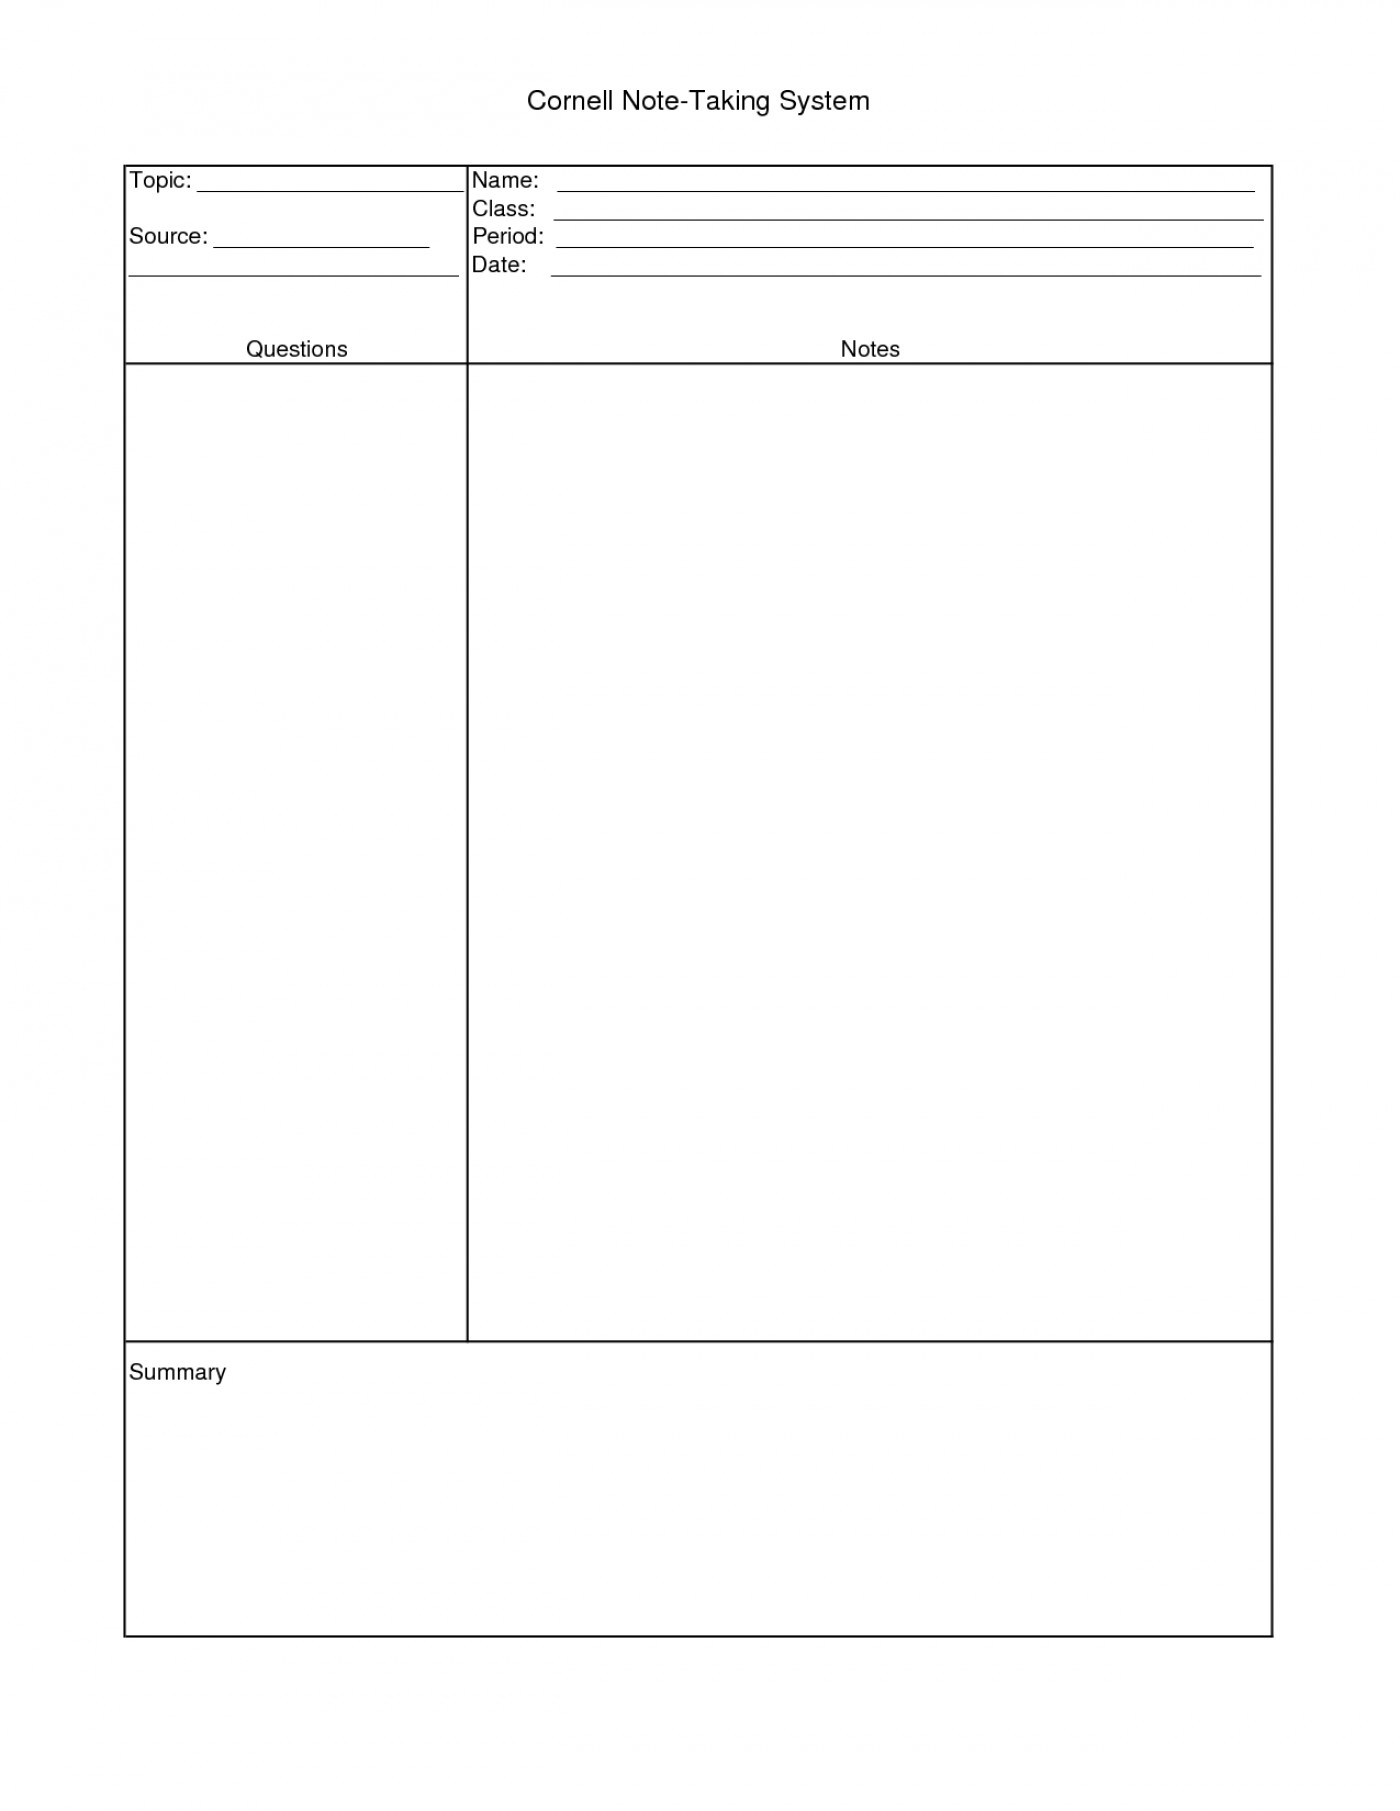 017 Research Paper Cornell Note Taking Template 31547 Cards intended